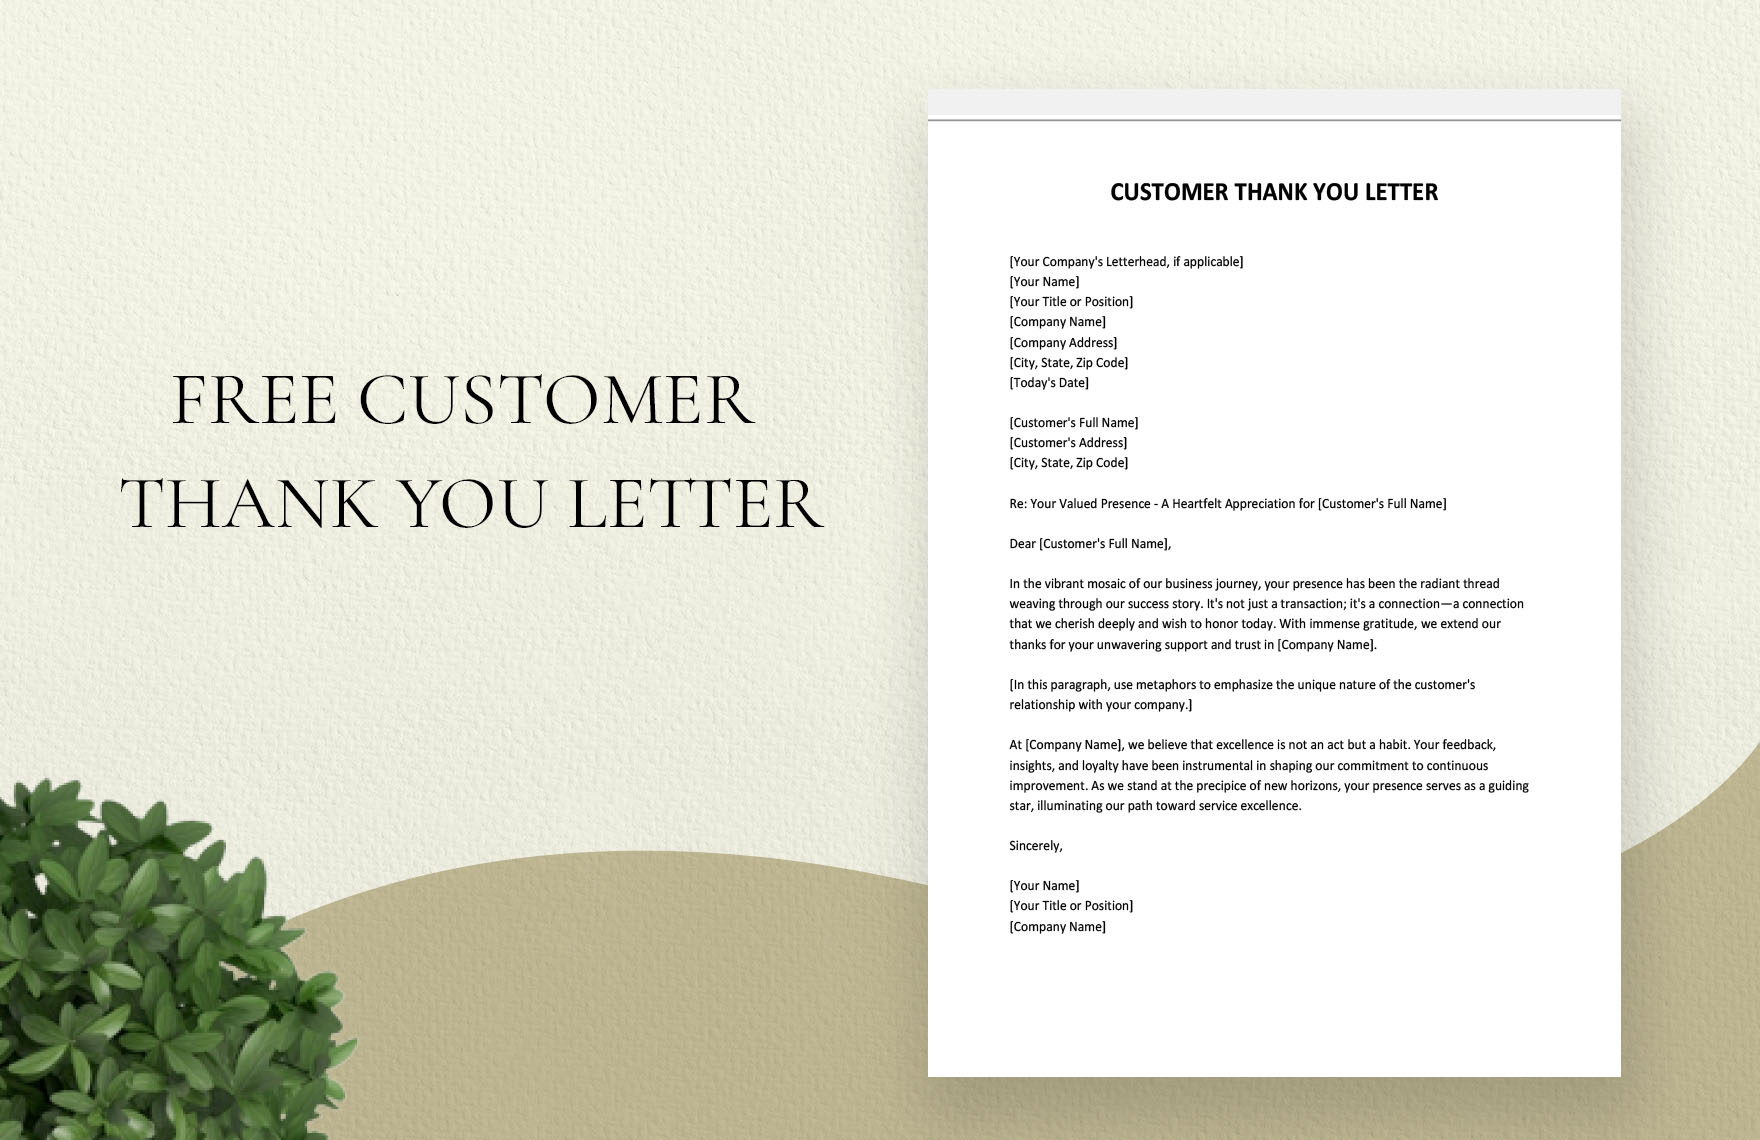 Customer Thank You Letter